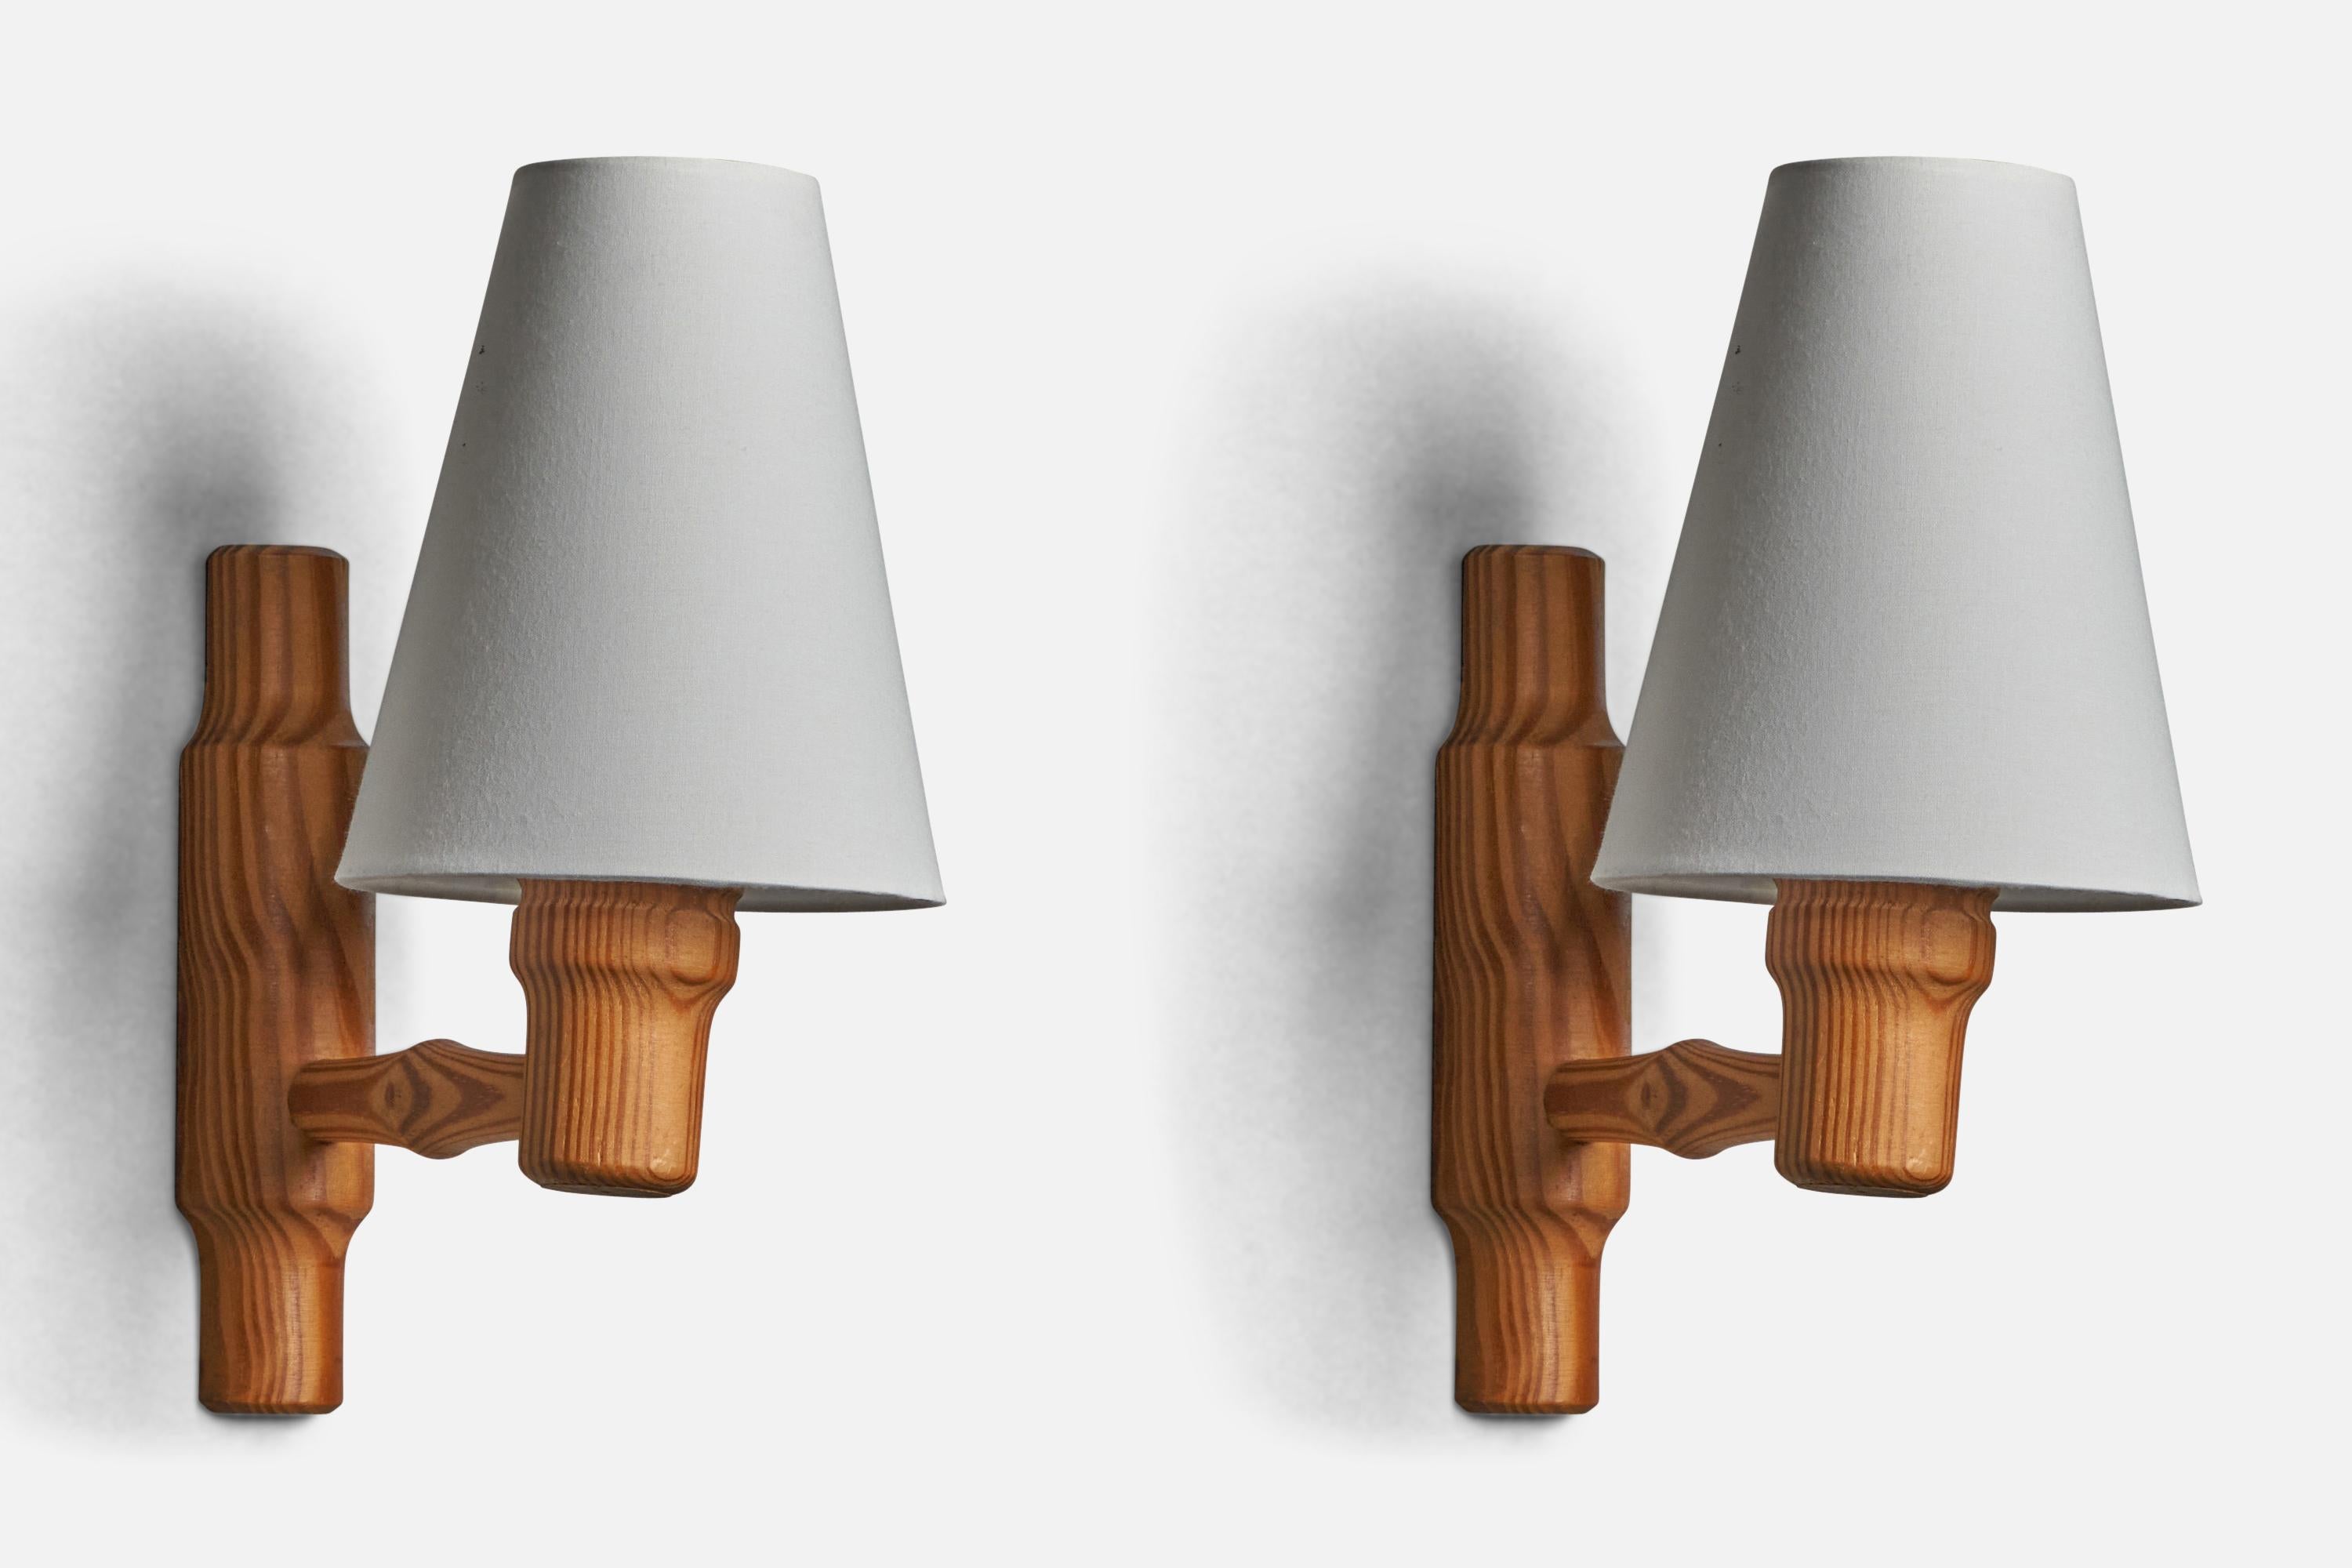 A pair of pine and white fabric wall lights designed and produced in Denmark, c. 1970s.

Overall Dimensions (inches): 11.5” H x 5.5” W x 8.5” D
Back Plate Dimensions (inches): 8.3” H x 2” W x 1” D
Bulb Specifications: E-14 Bulb
Number of Sockets: 1